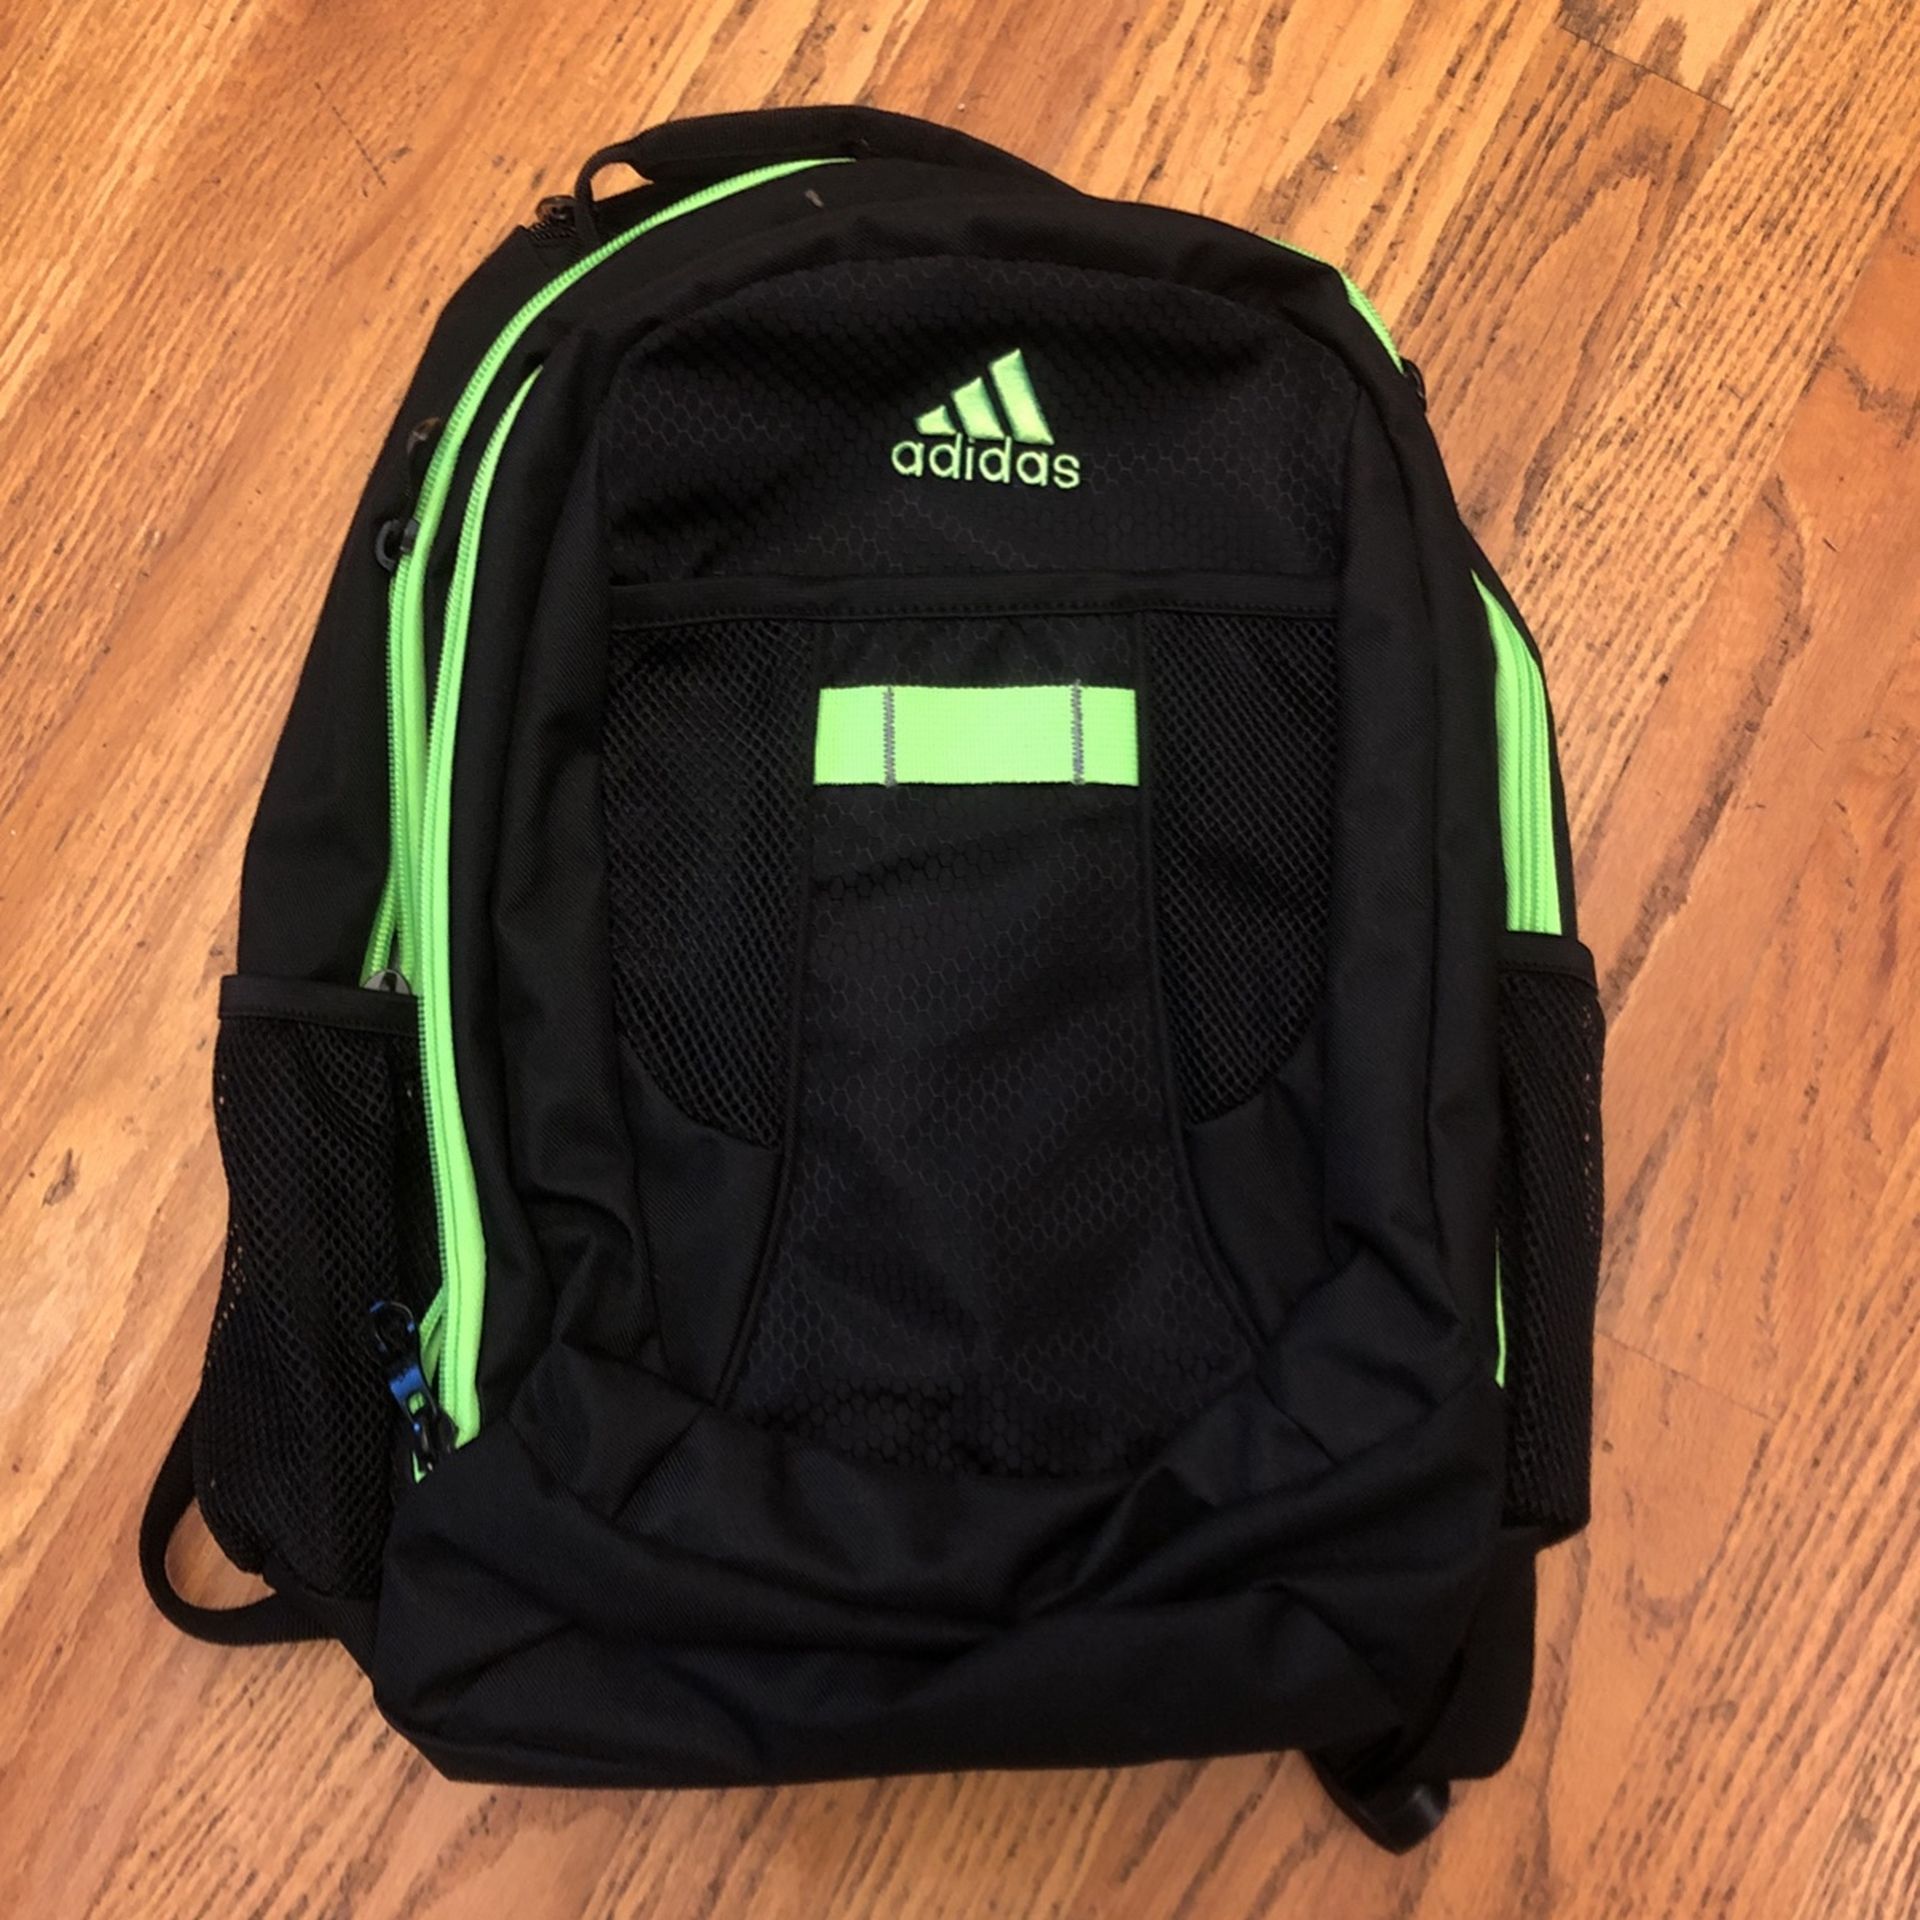 New Adidas Back Pack 